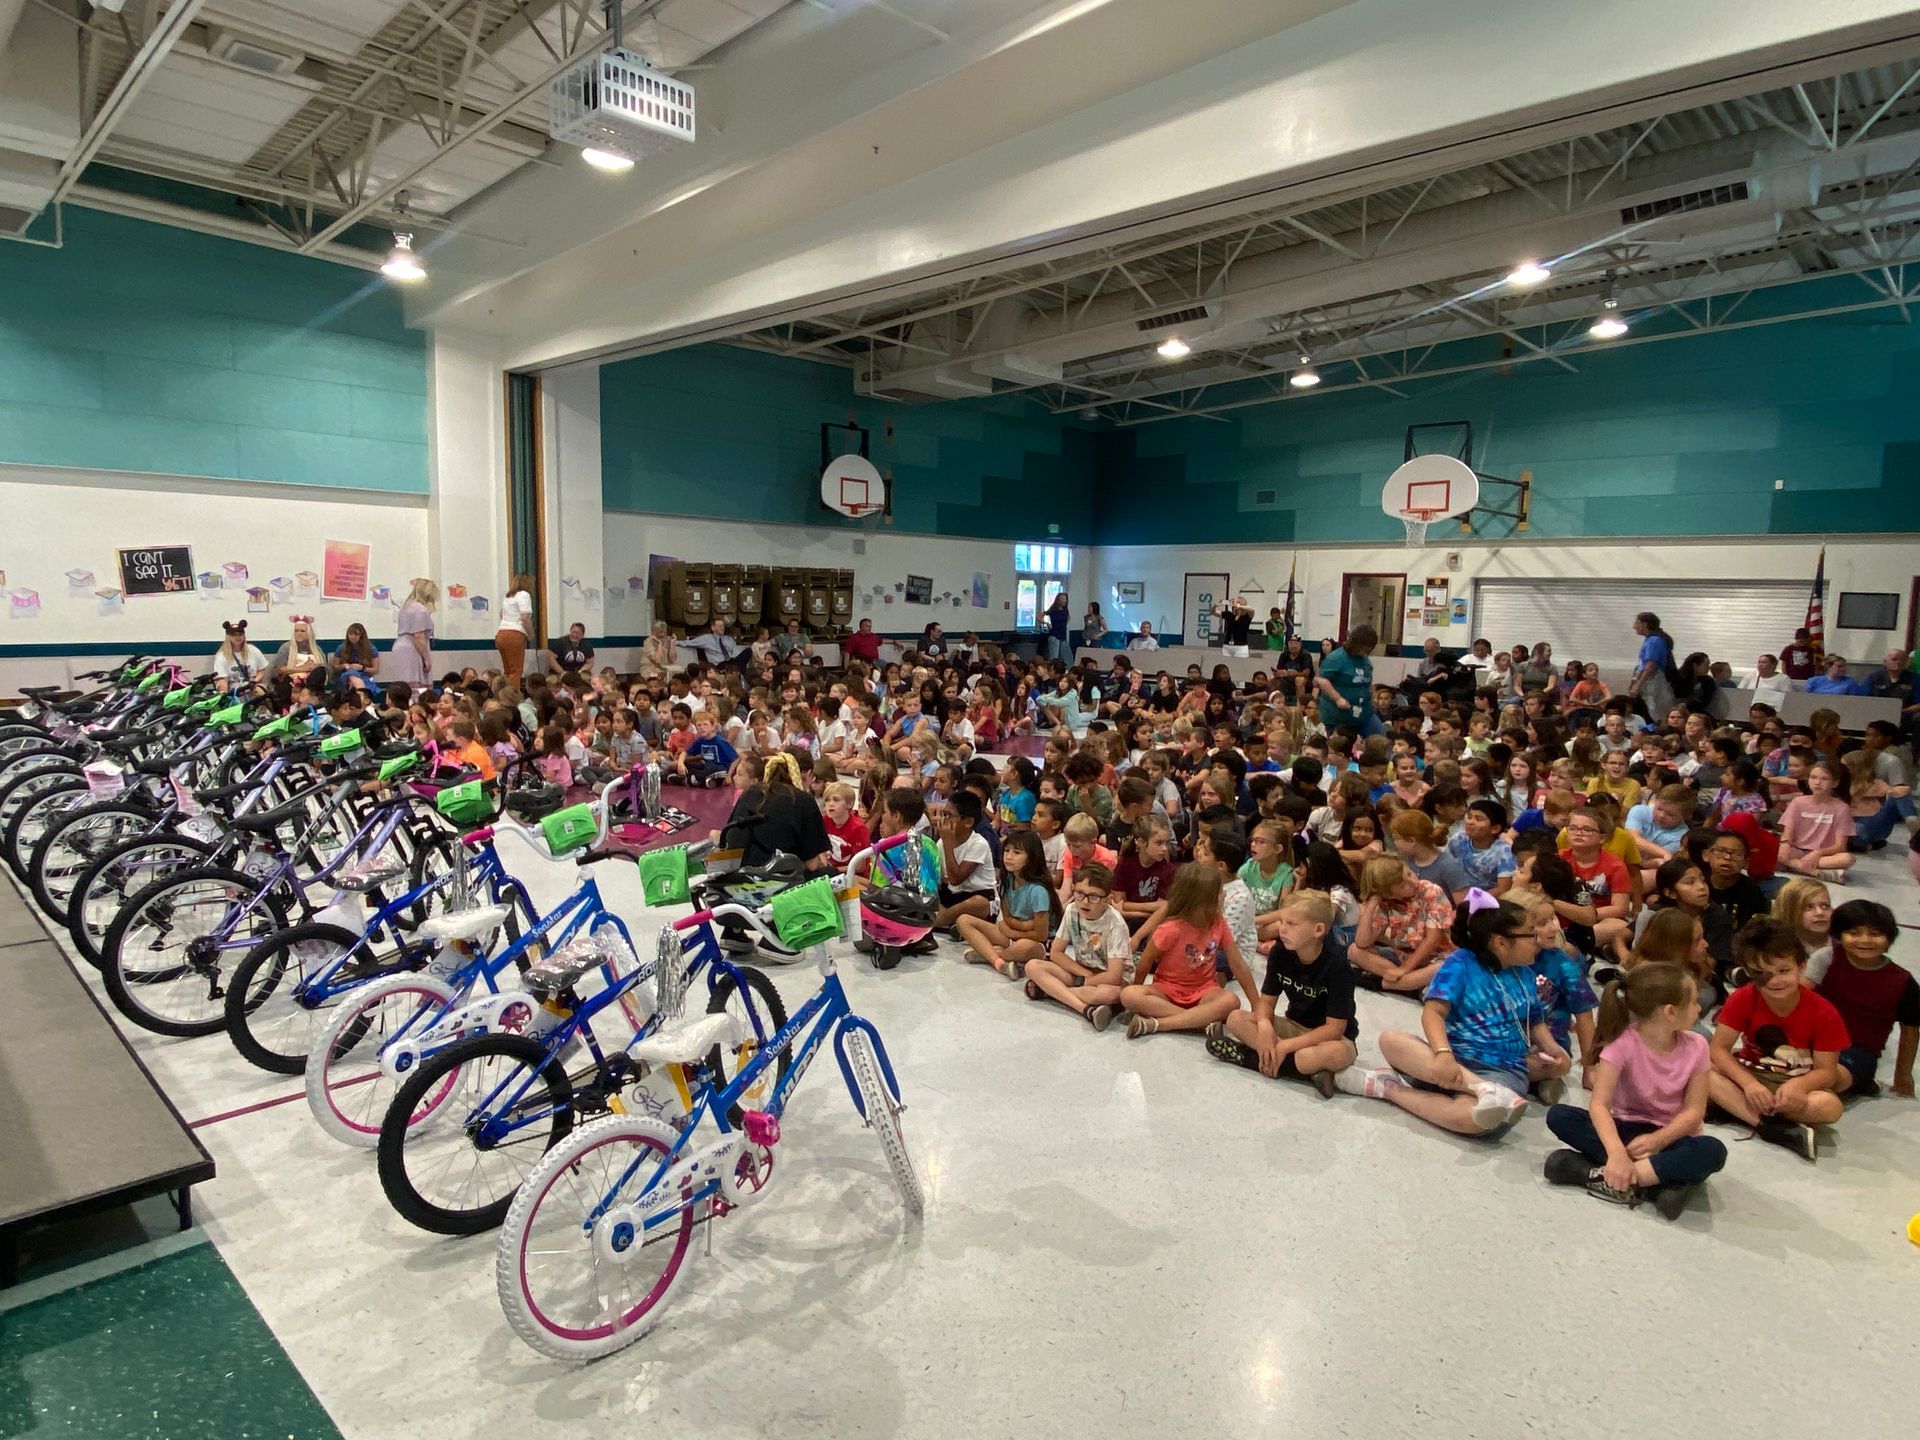 Masonic Lodge Bikes for Books Program at Sandstone Elementary School in St. George Utah. 13 bicycles and helmets being  awarded to students for reading